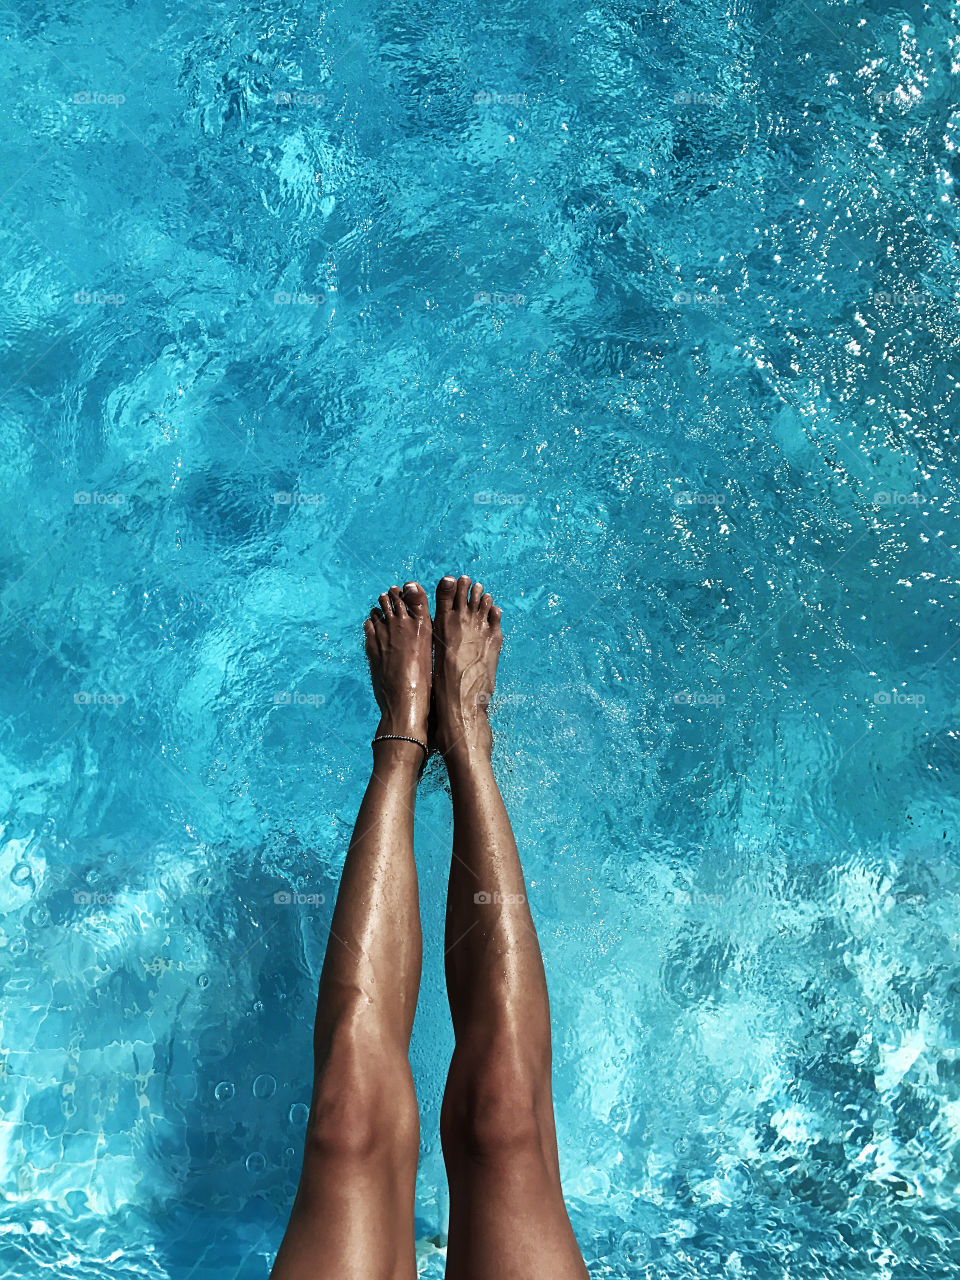 Tanned Female legs over the blue water of swimming pool 